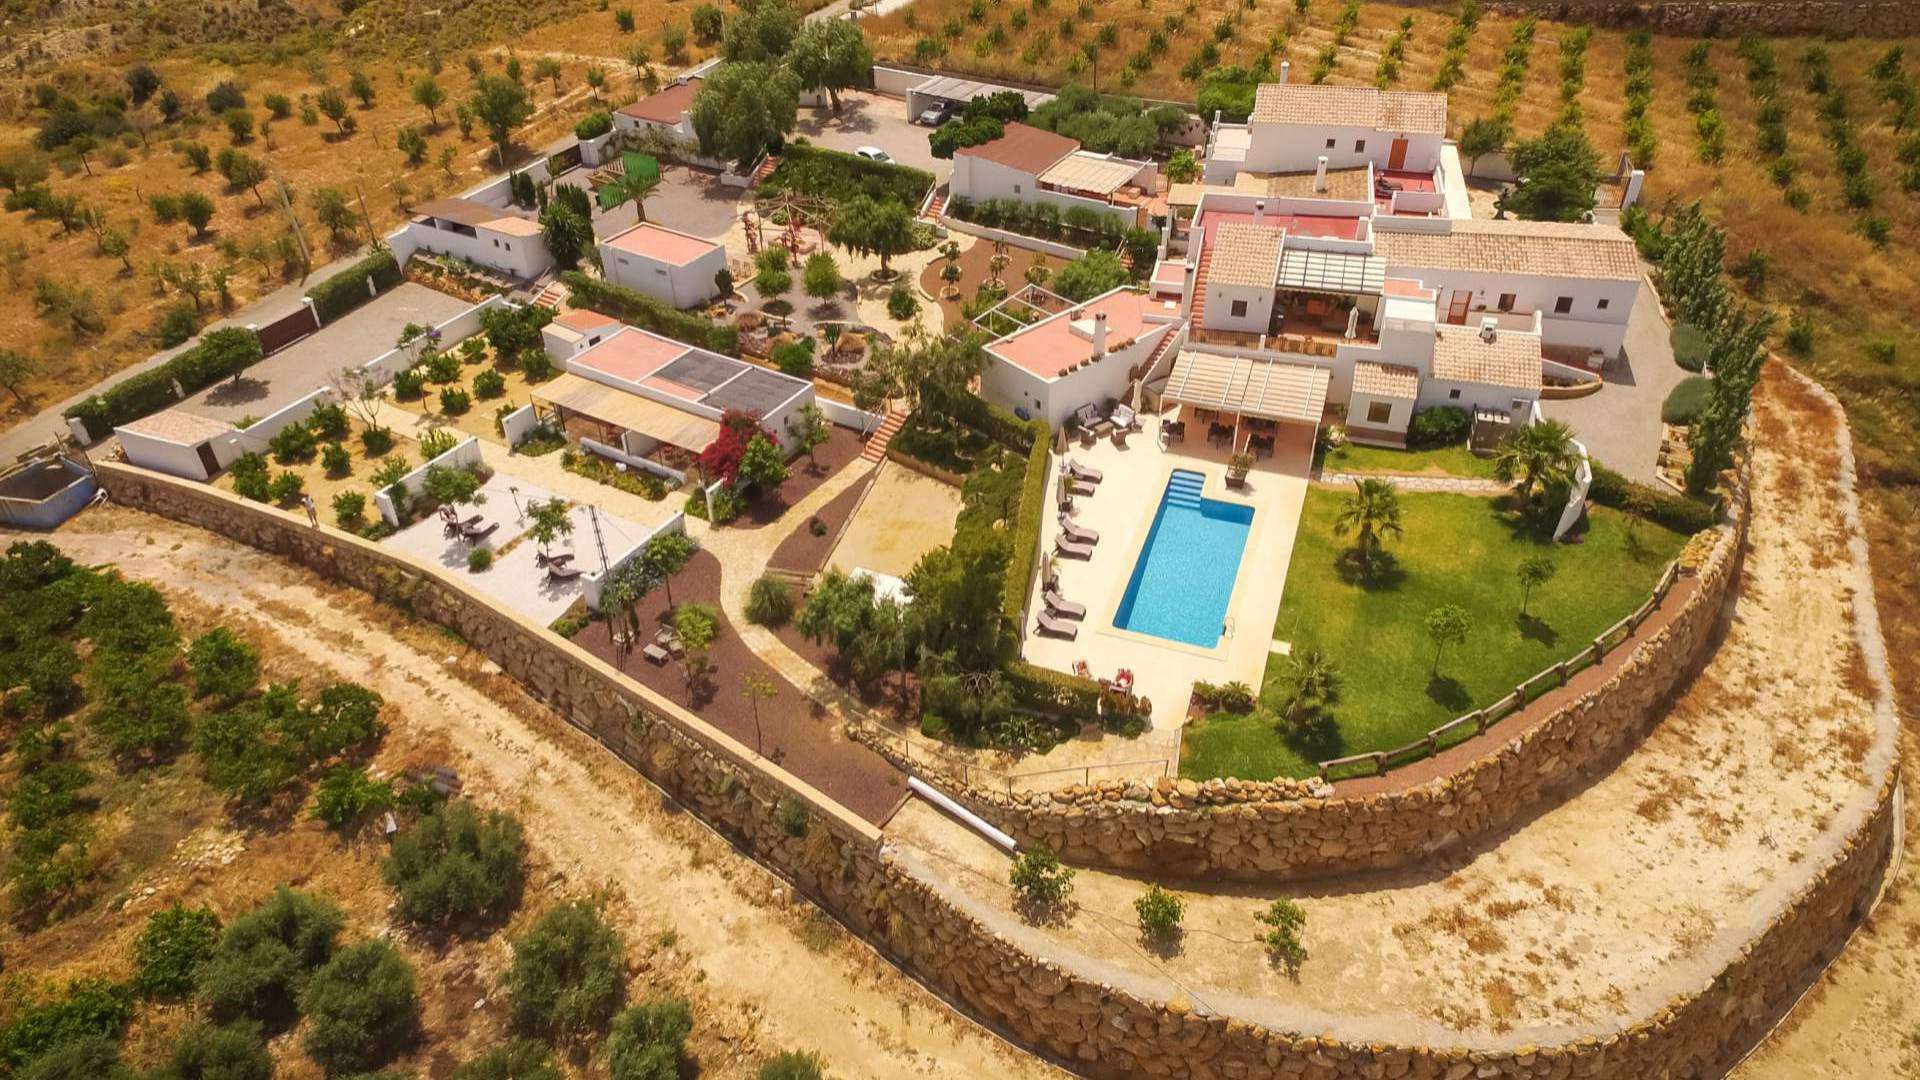 Bed and Breakfast in Andalusia: aerial view of B&B Cortijo El Sarmiento